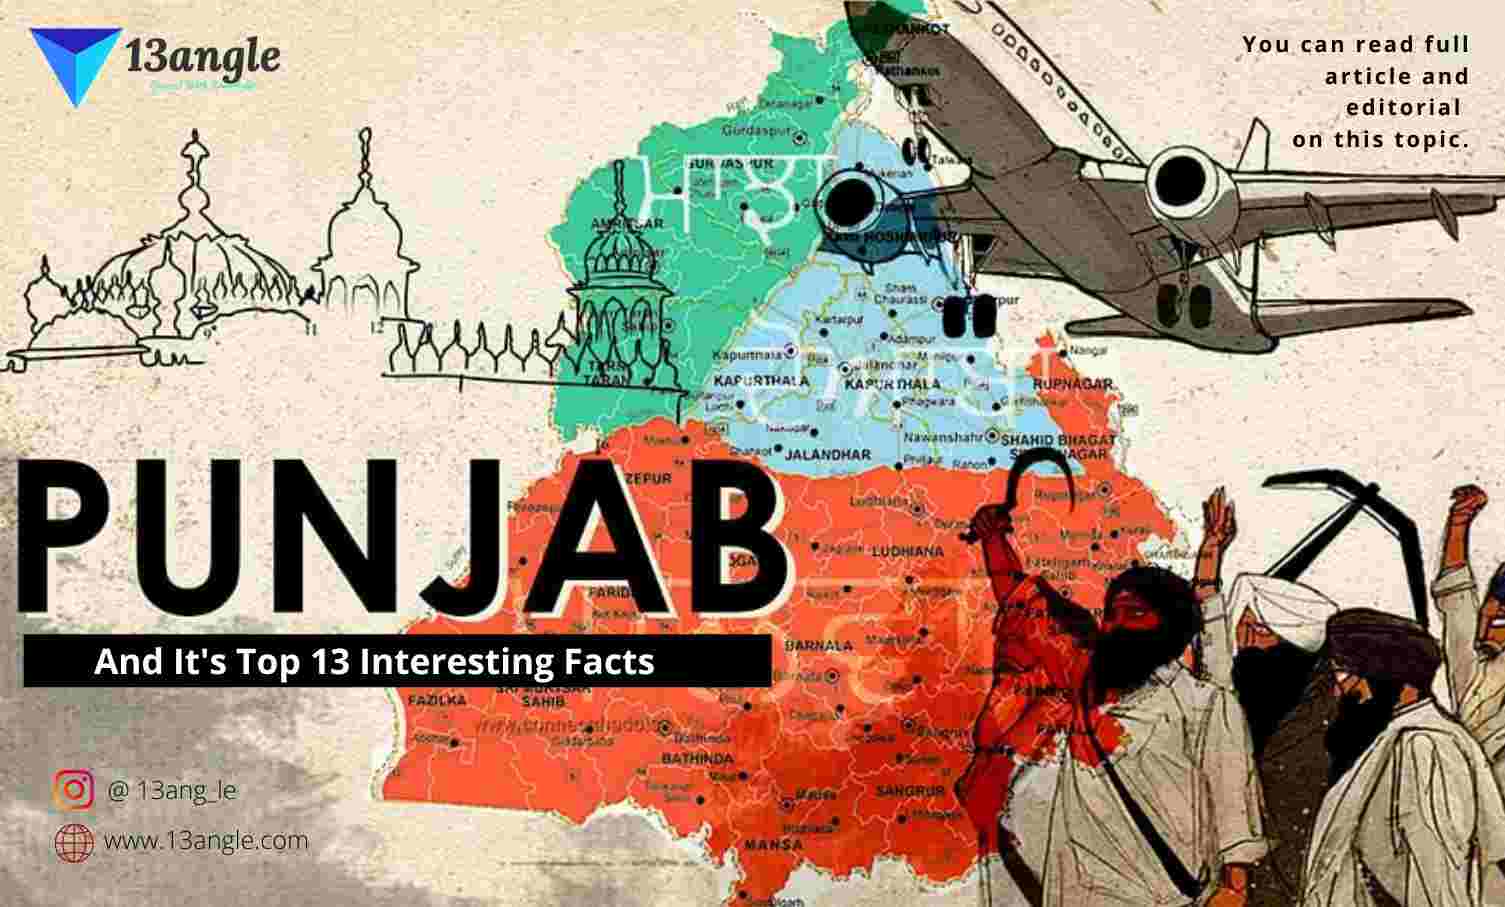 Punjab (The Breadbasket Of India) And It's Top 13 Interesting Facts- 13angle.com